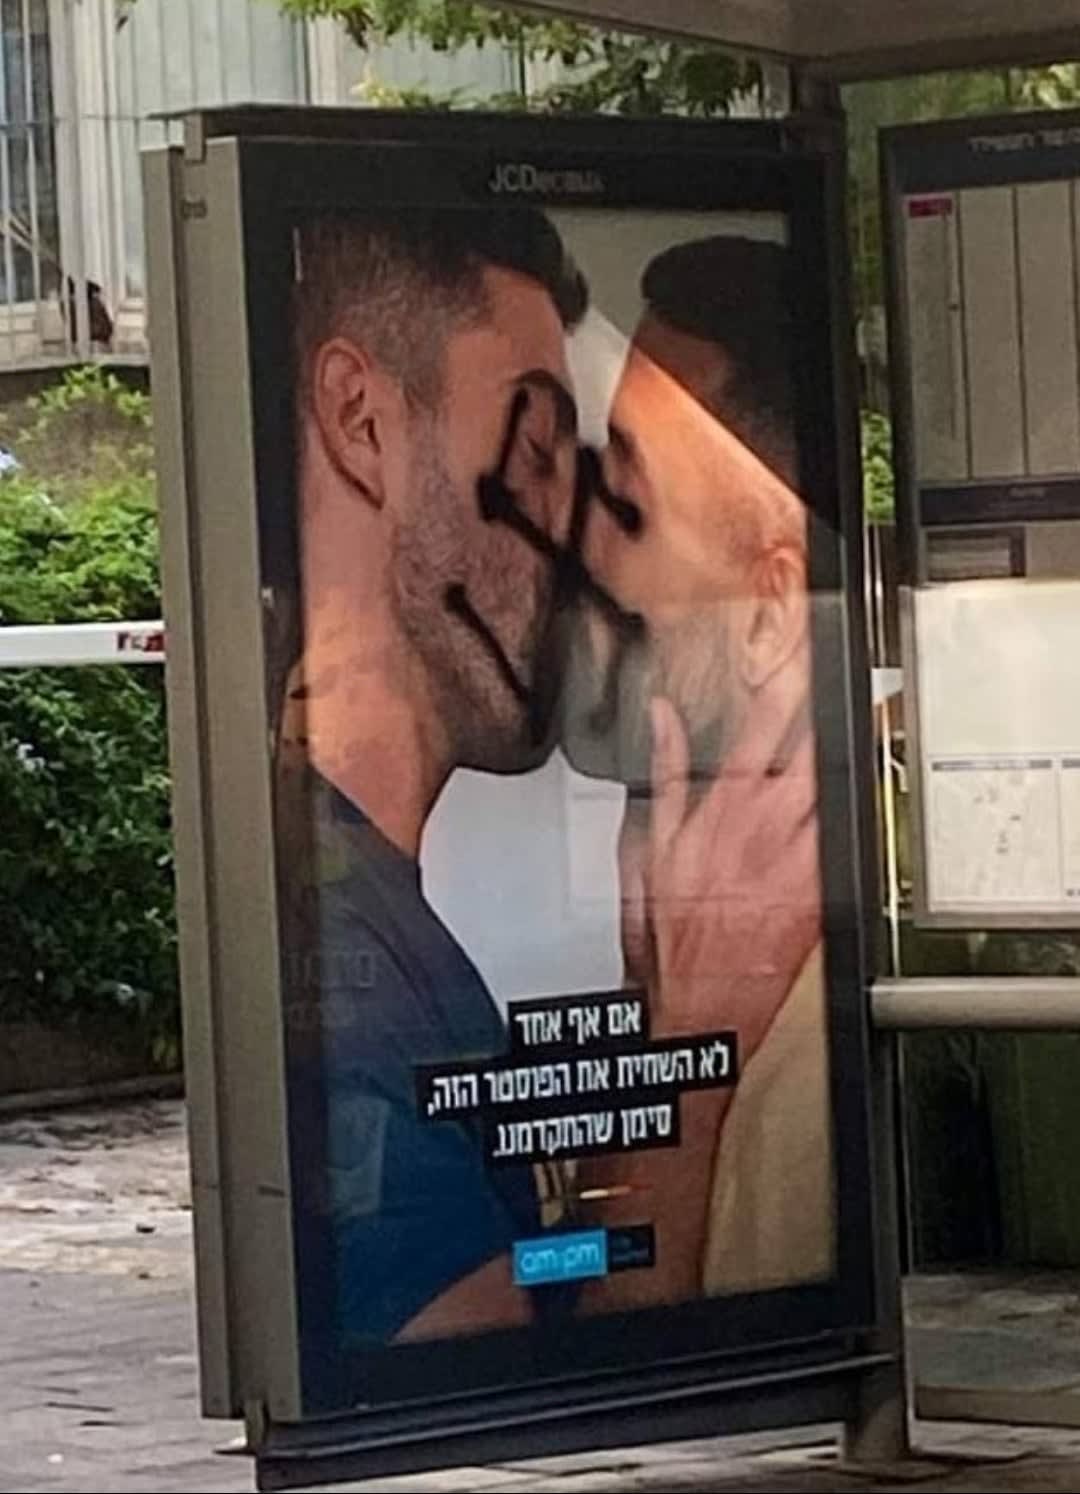 "if no one vandalized this poster, it's a sign we made progress". (Hebrew caption)